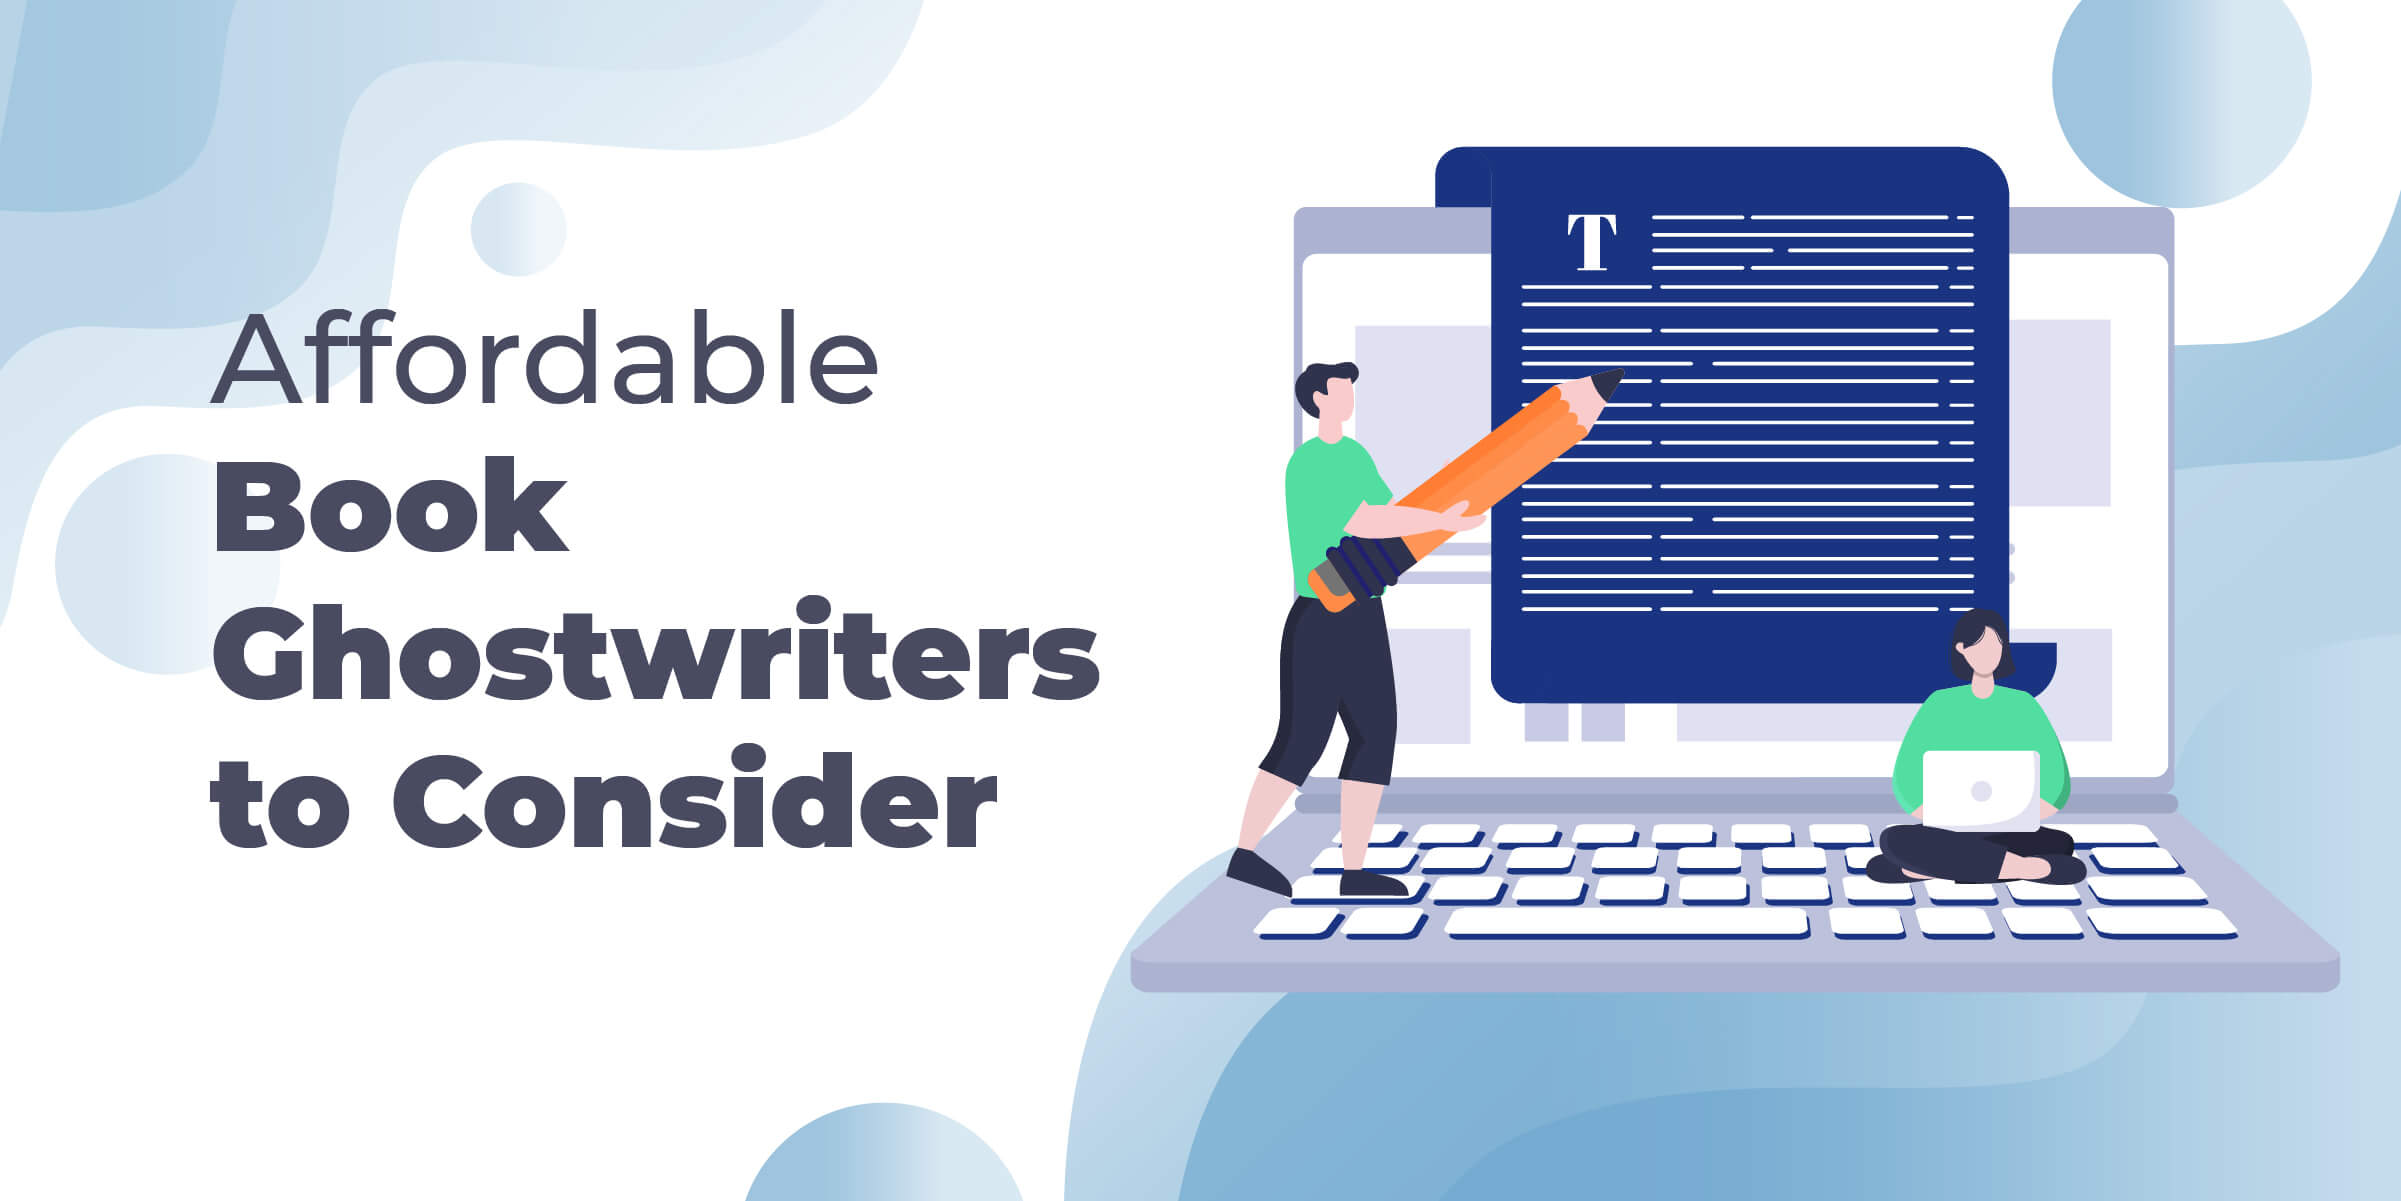 Affordable Book Ghostwriters to Consider